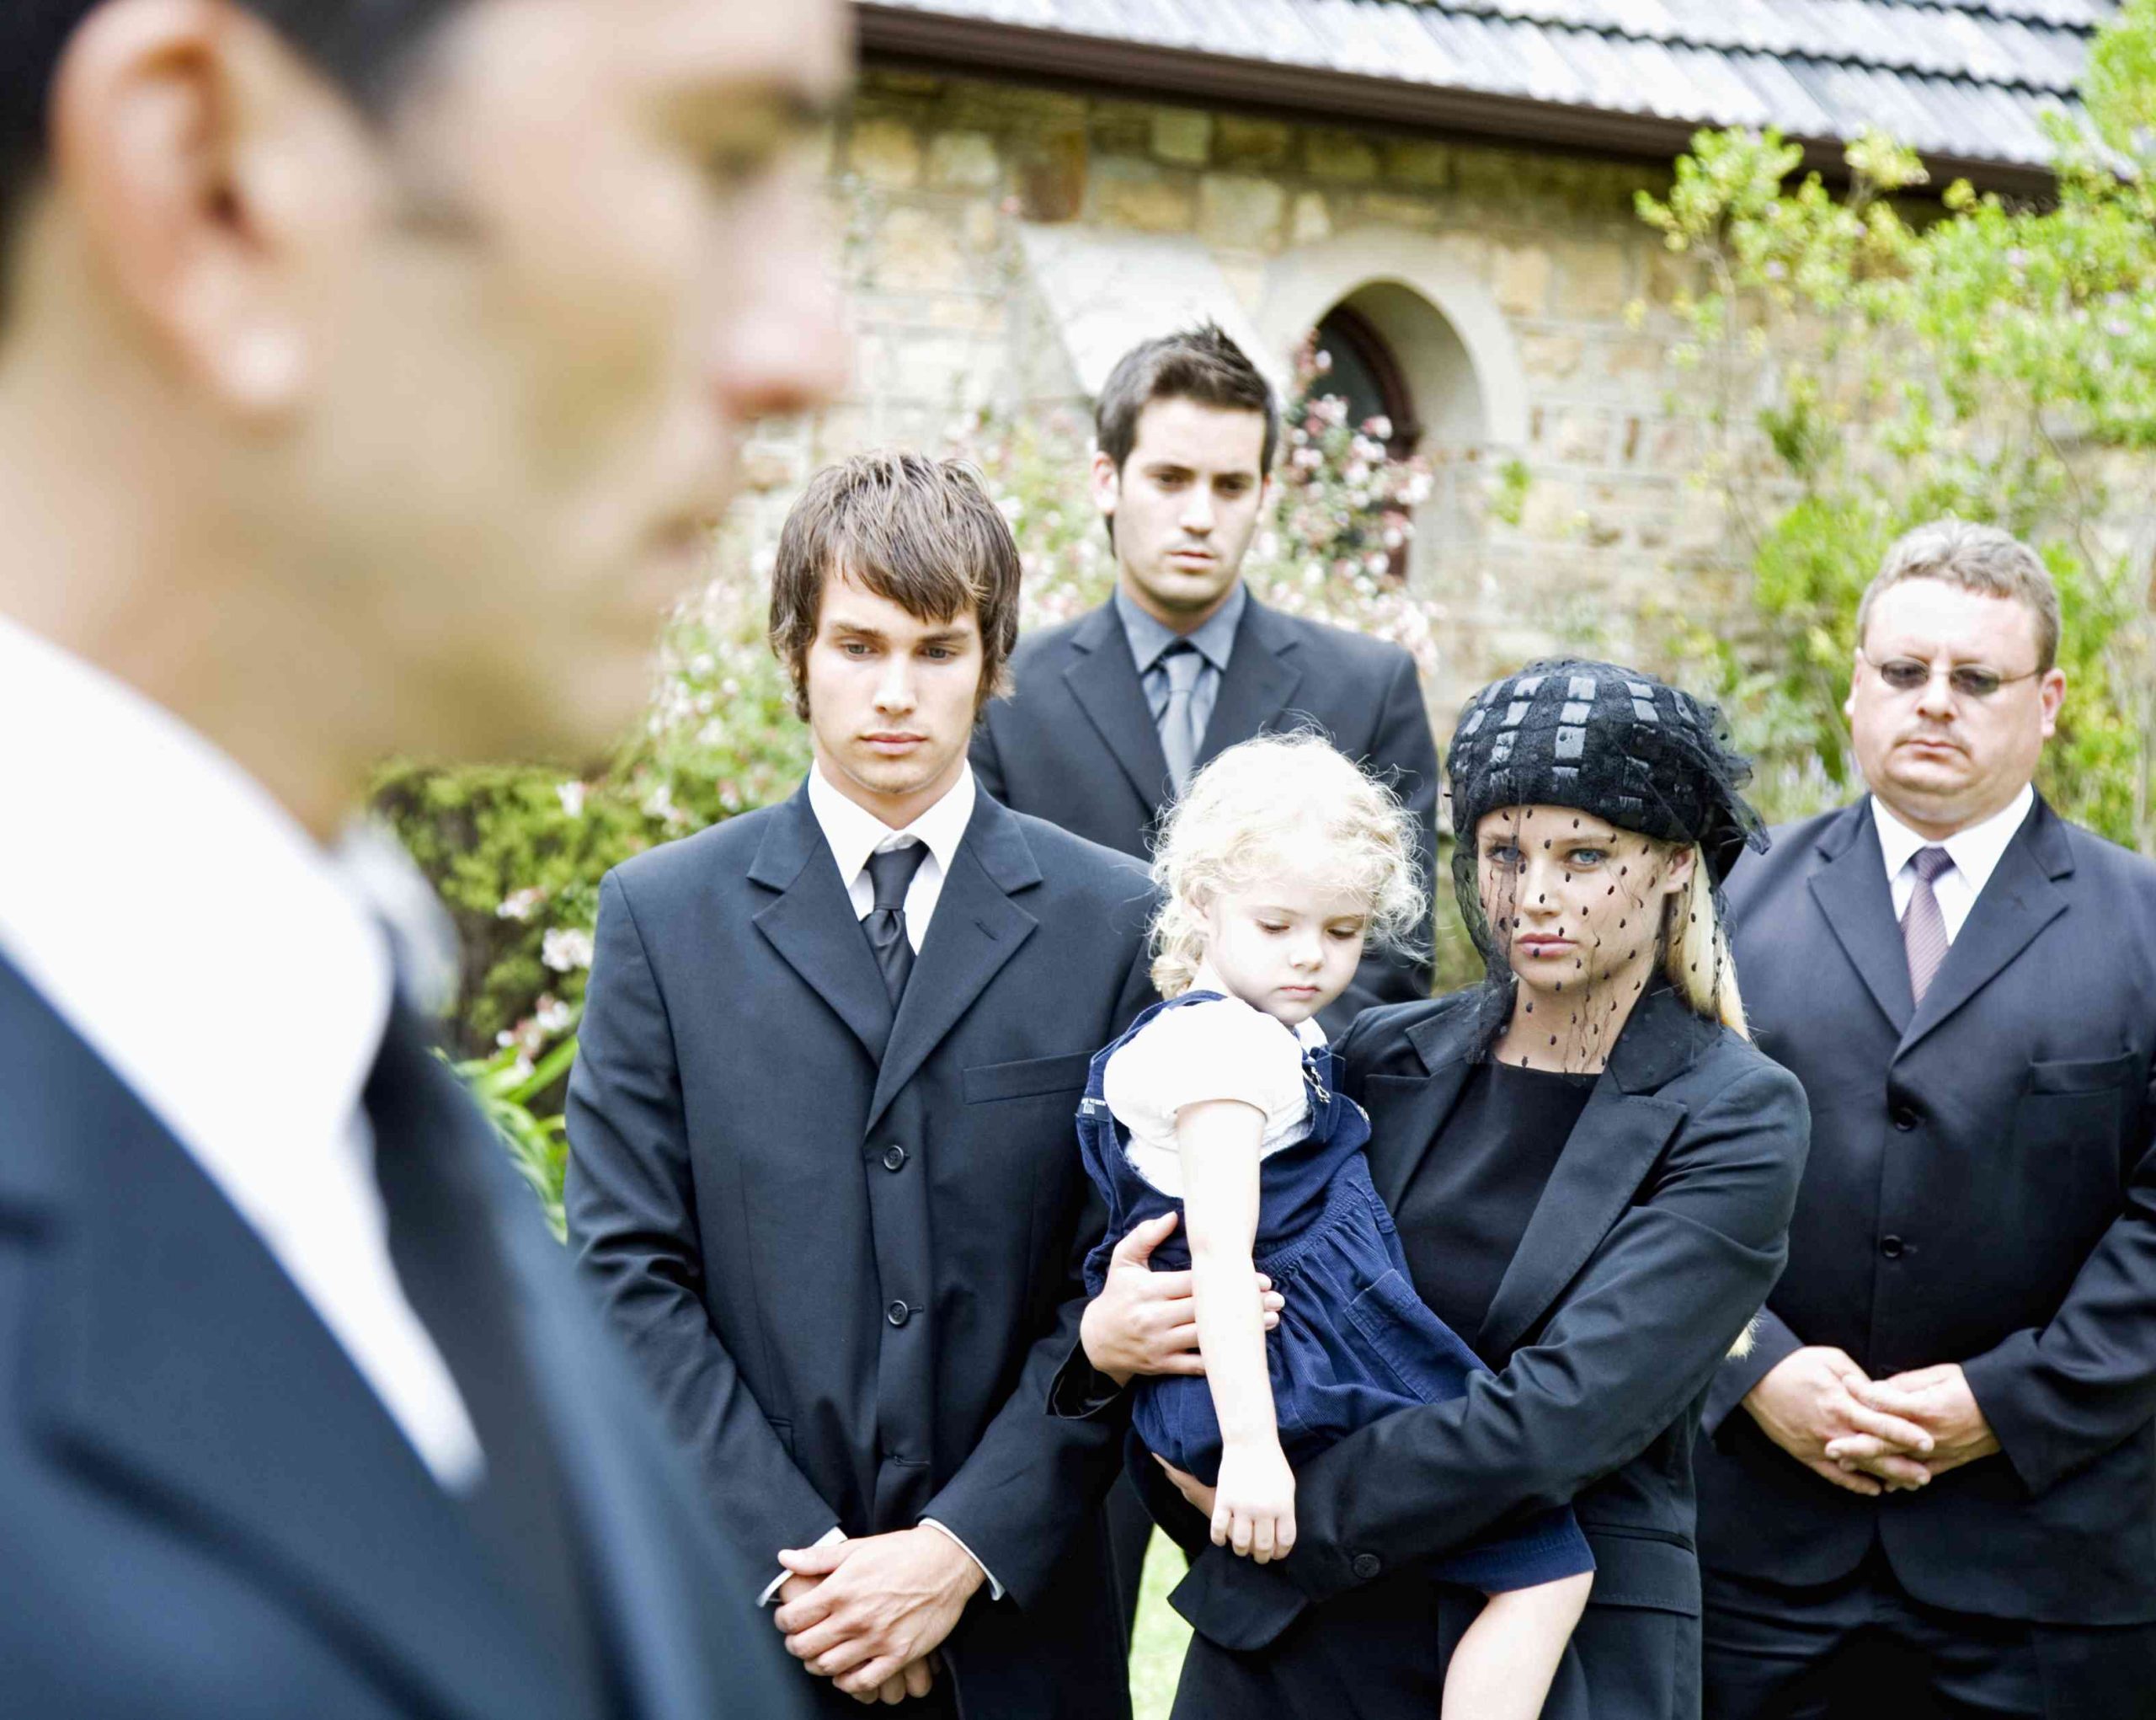 Funeral Service: what to expect and how to prepare